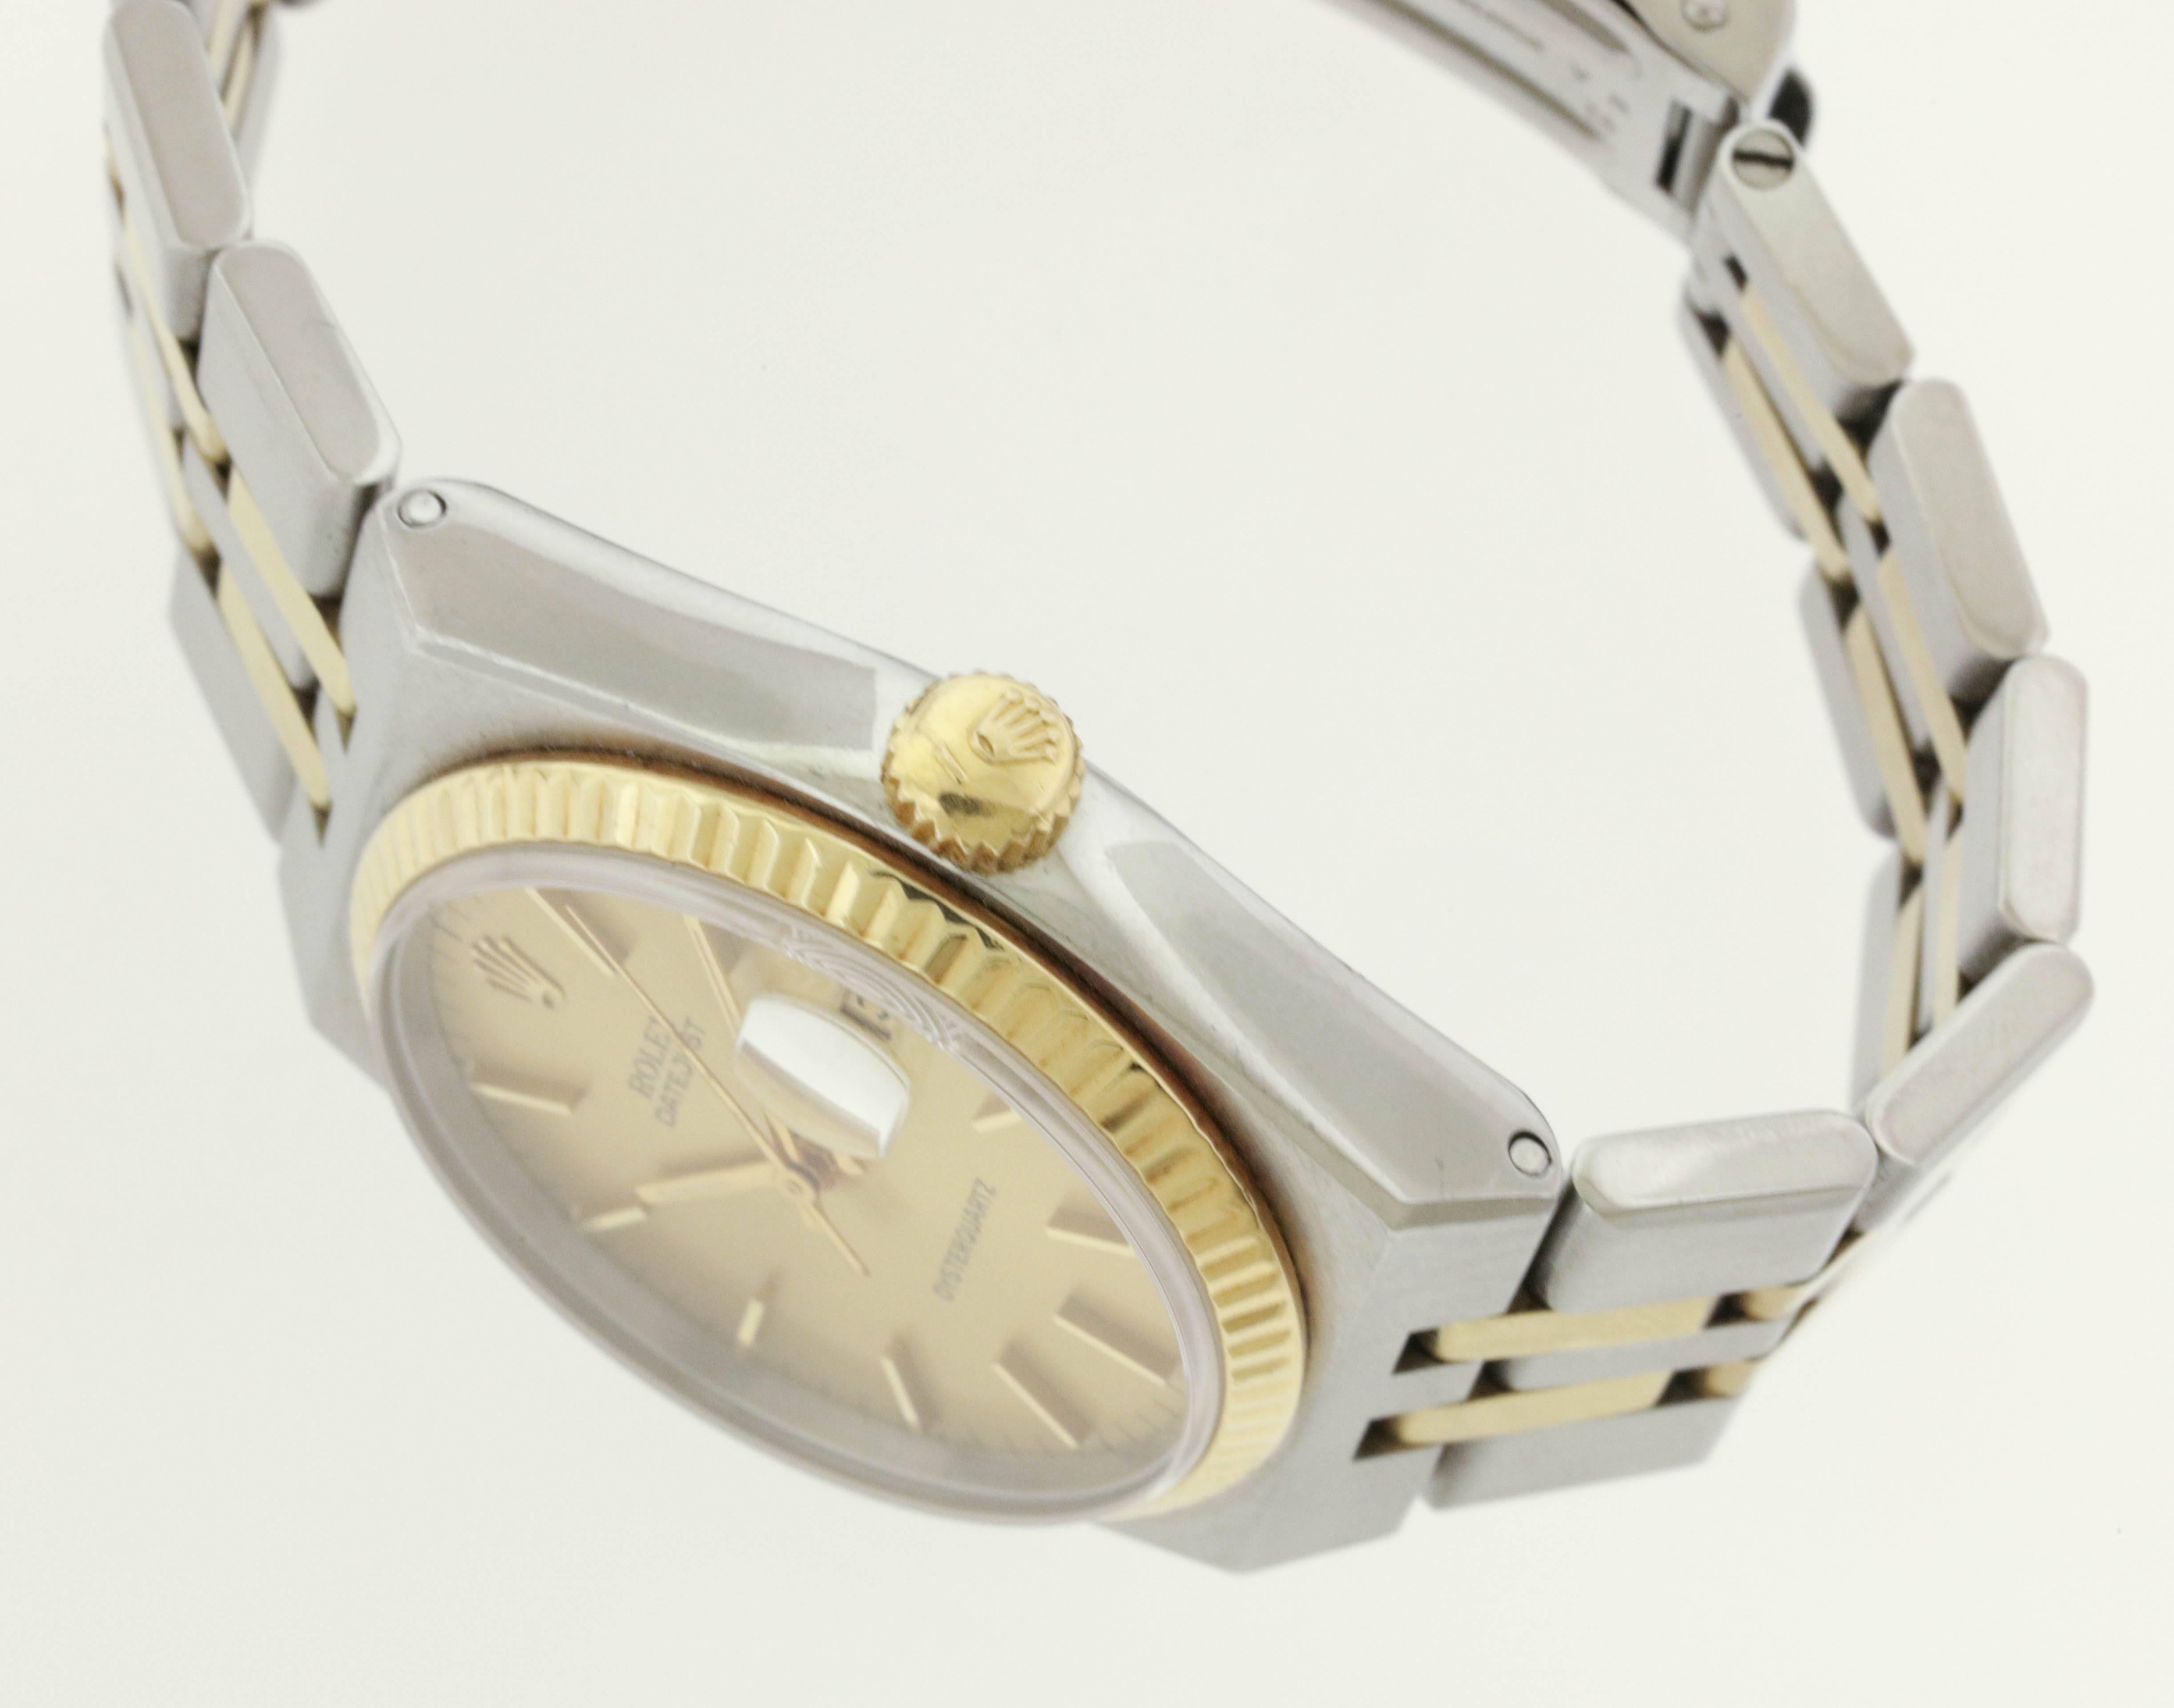 Two tone steel and 14K gold Rolex, Oysterquartz Datejust, Ref. 17013, made in 1978, is a  tonneau-shaped, center seconds, water-resistant, stainless steel and 14K yellow gold quartz wristwatch with date and an integral stainless steel and 14K yellow